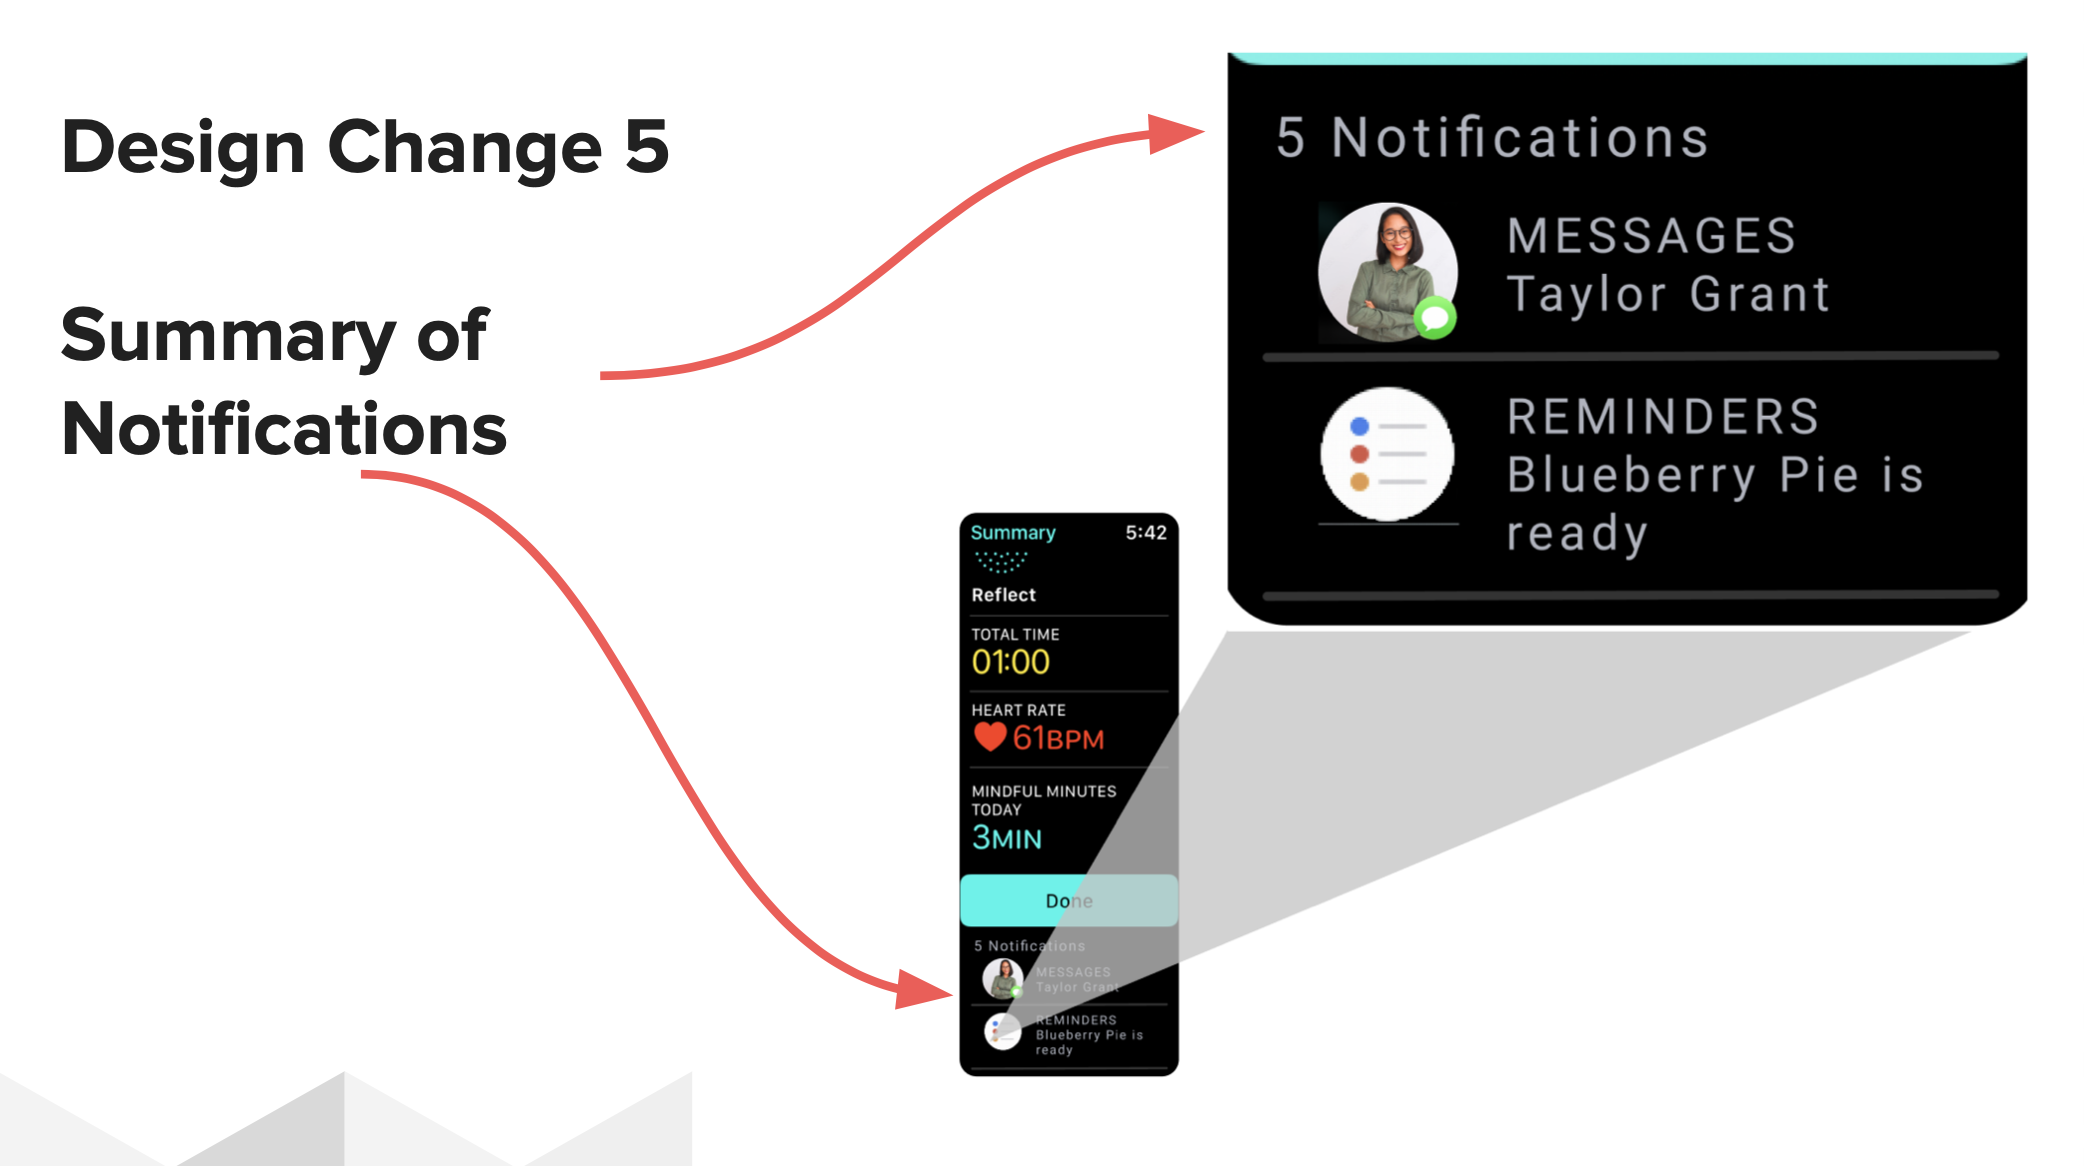 At the end of a Reflect session, I added a summary of notifications received during the Reflection session so the user doesn't miss any important messages after a 1-3 minute session.